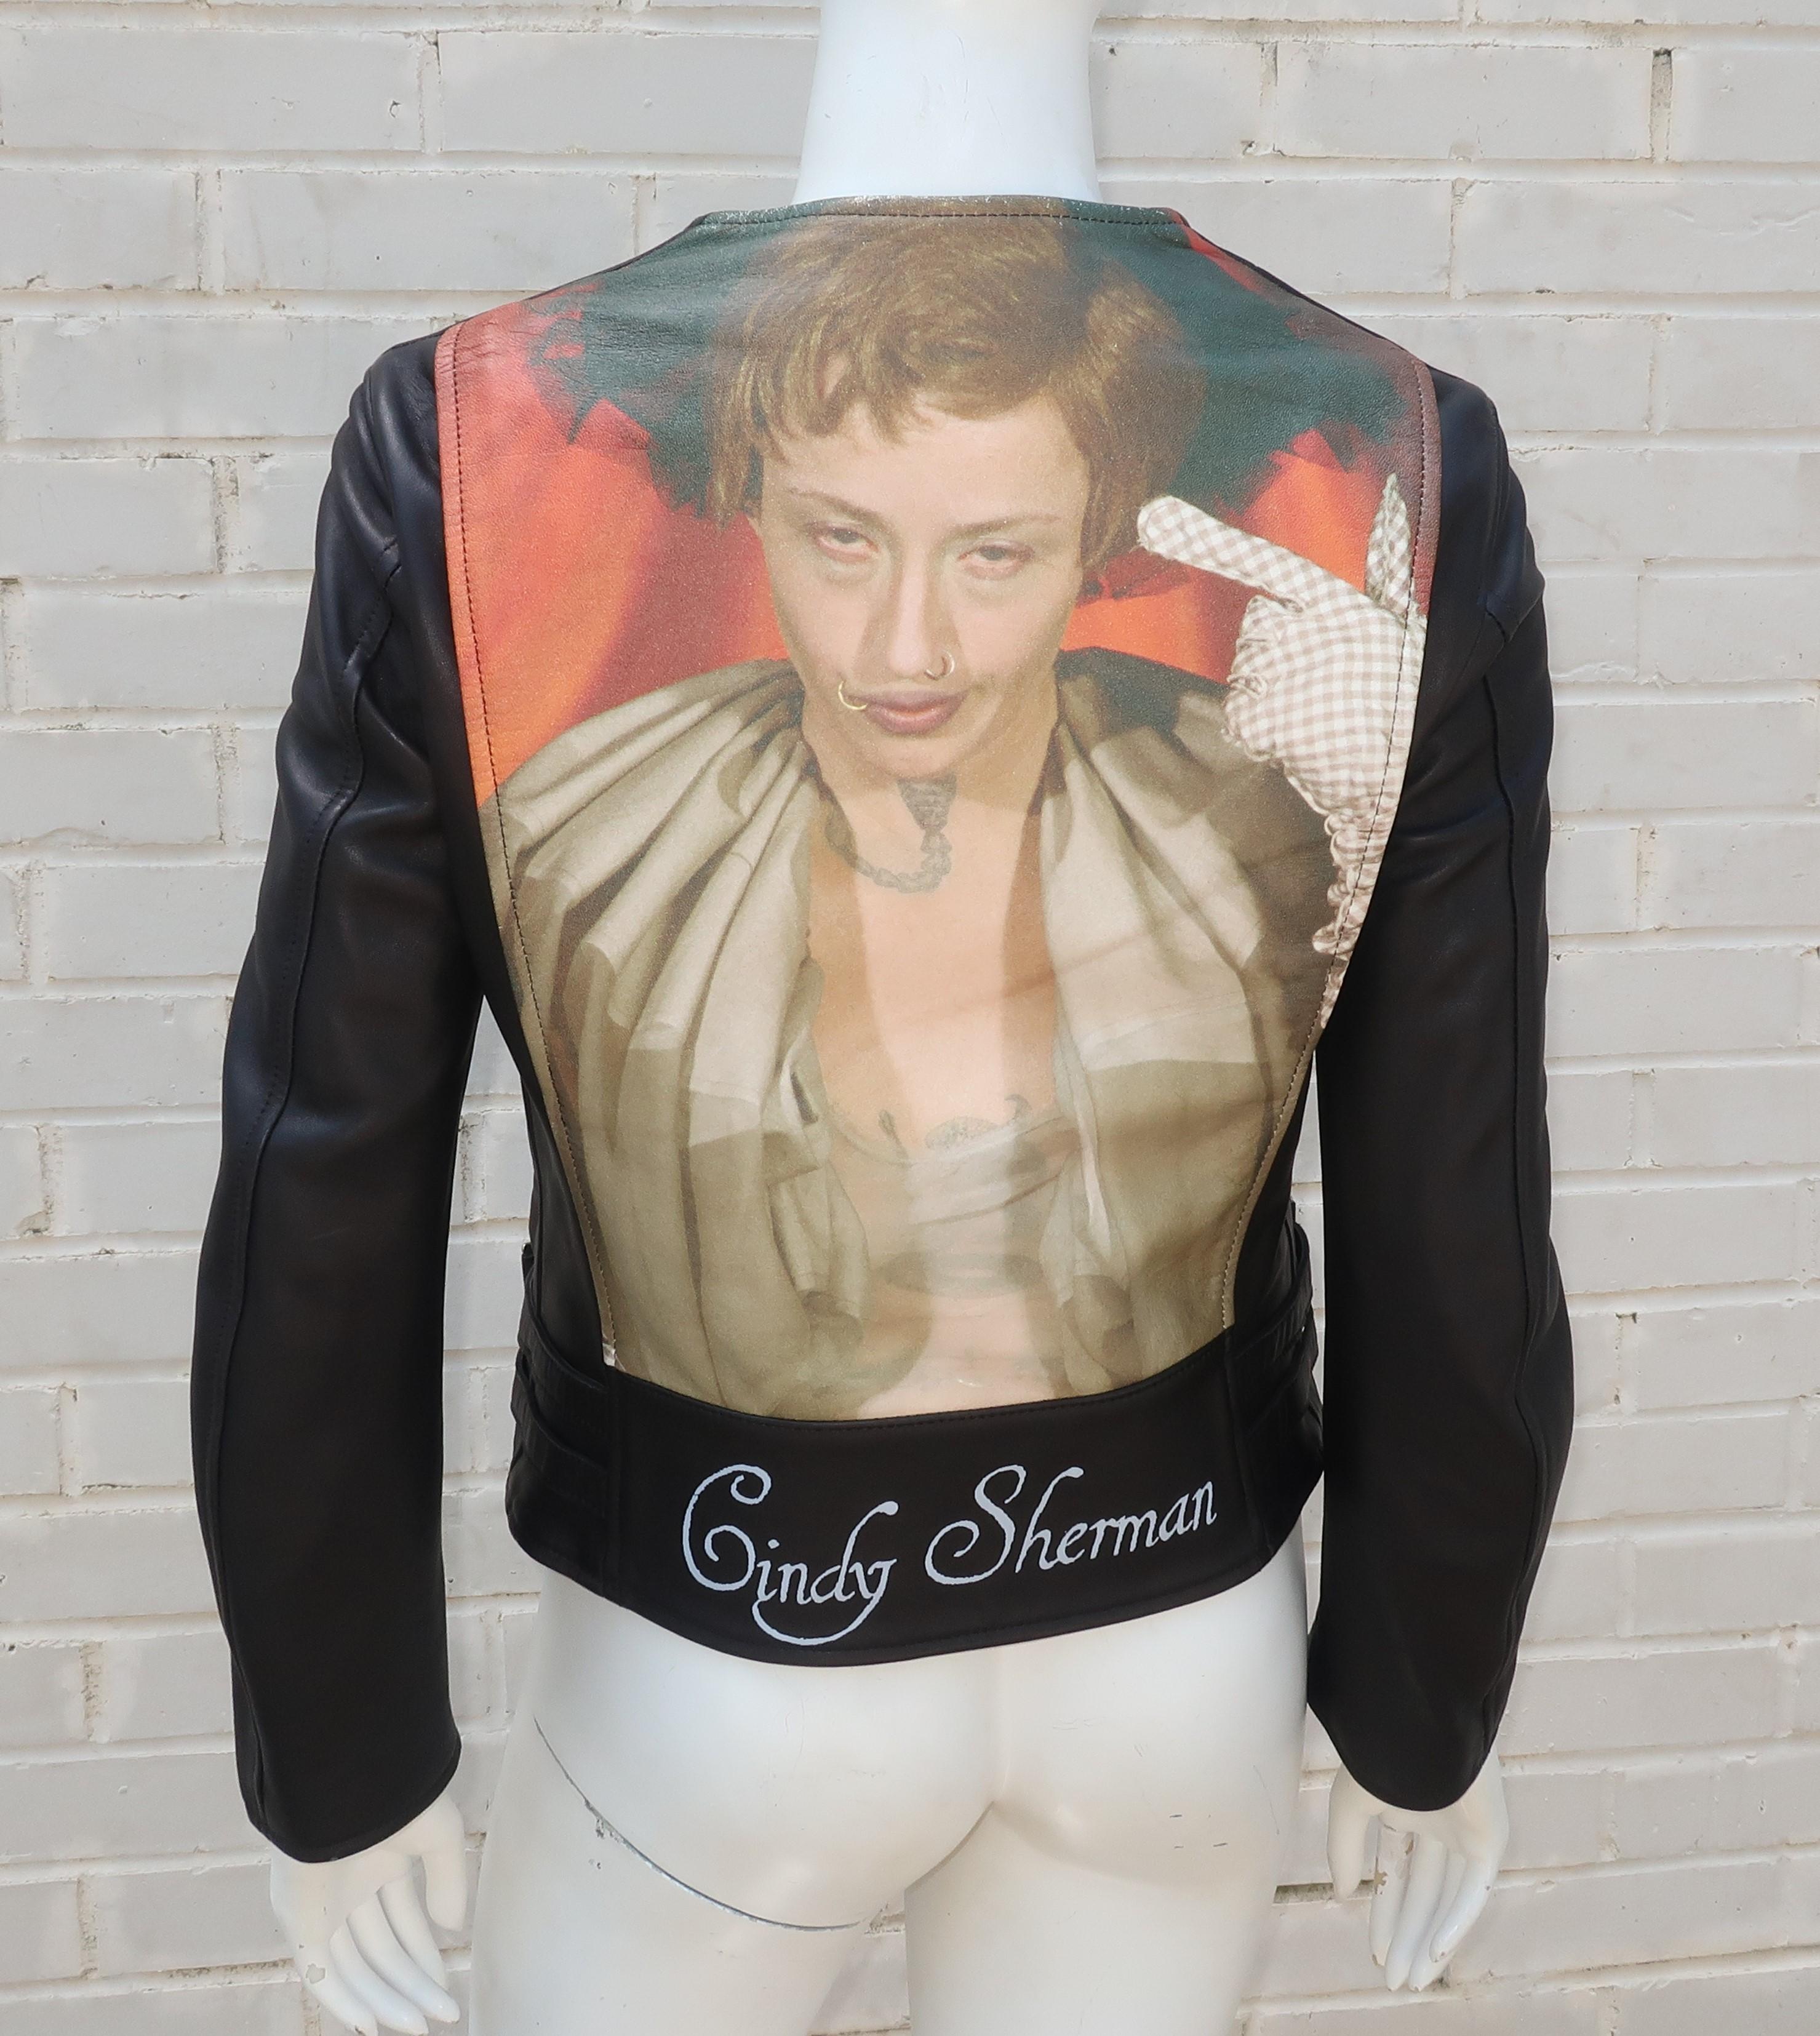 Jun Takahashi's collaboration with his friend and fellow artist, Cindy Sherman, has produced a series of evocative pieces of wearable art including this black leather motorcycle jacket printed with one of Sherman's portraits on the back.  The jacket